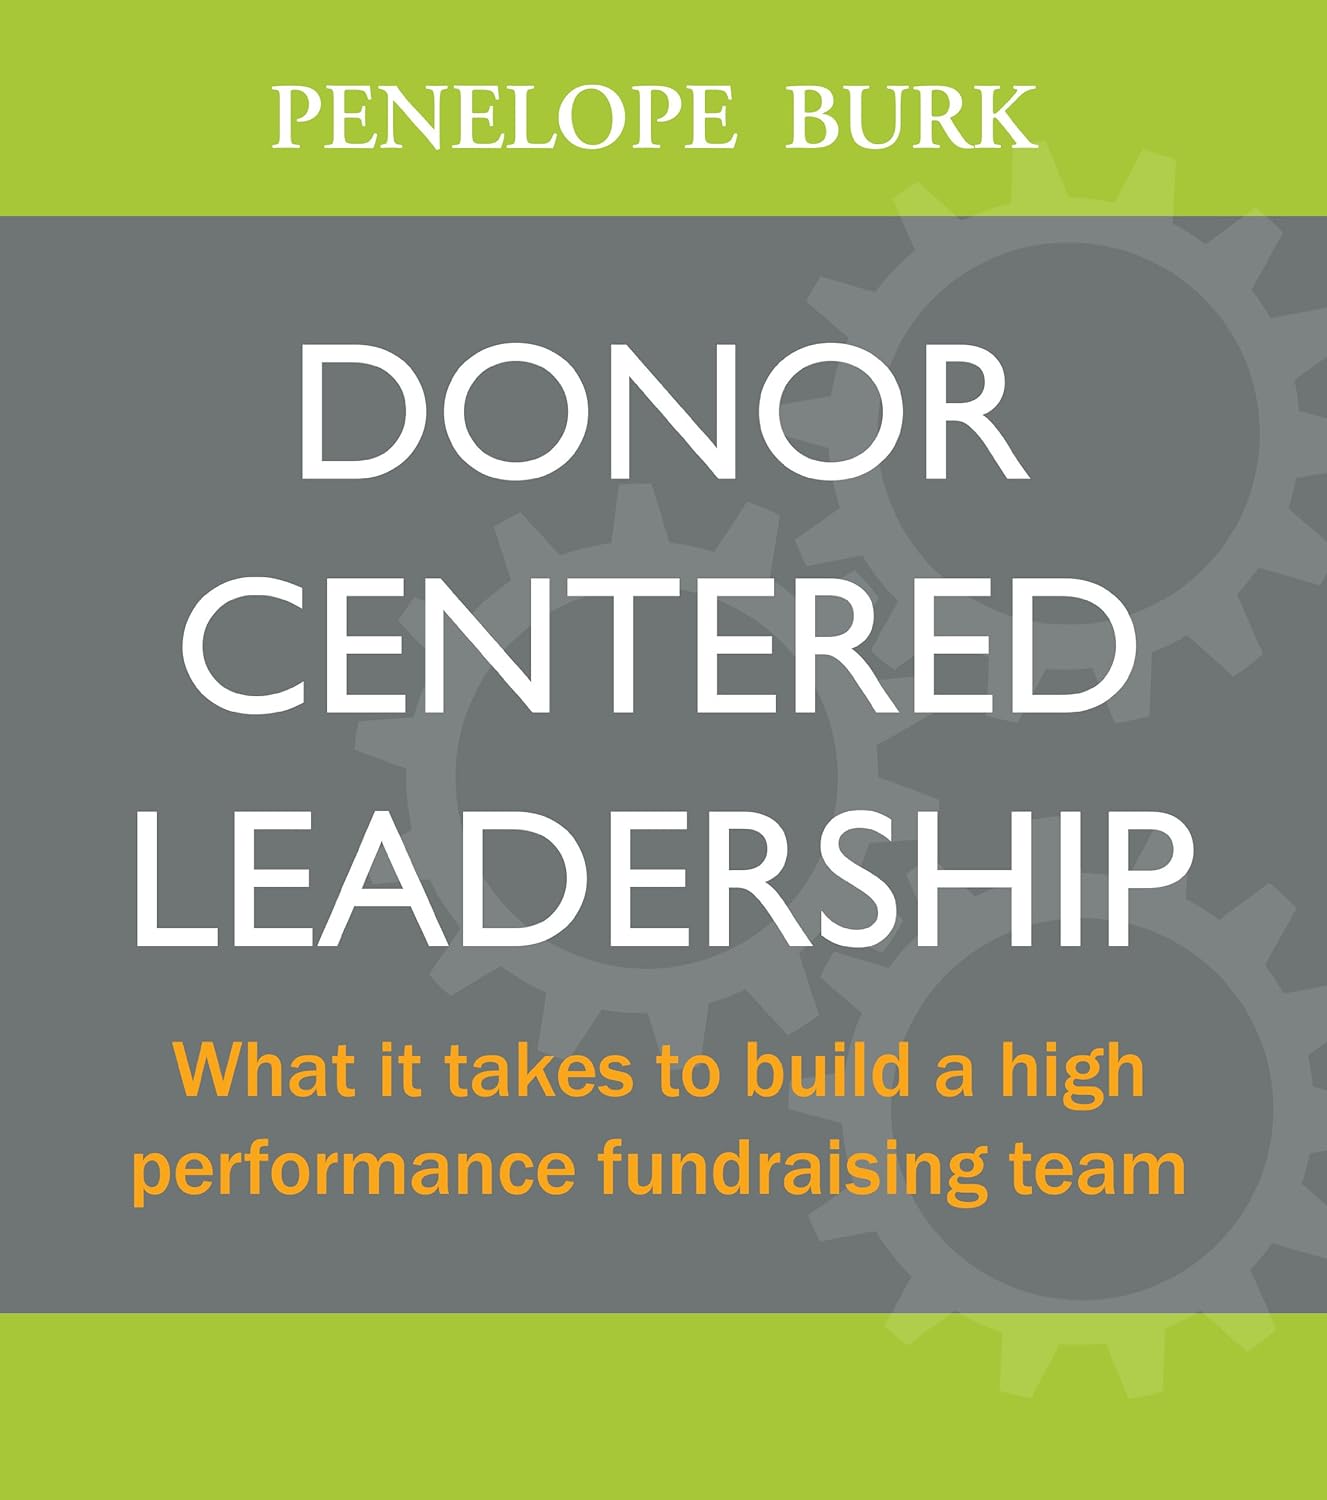 This image is the cover art of the fundraising book Donor-Centered Leadership by Penelope Burk.